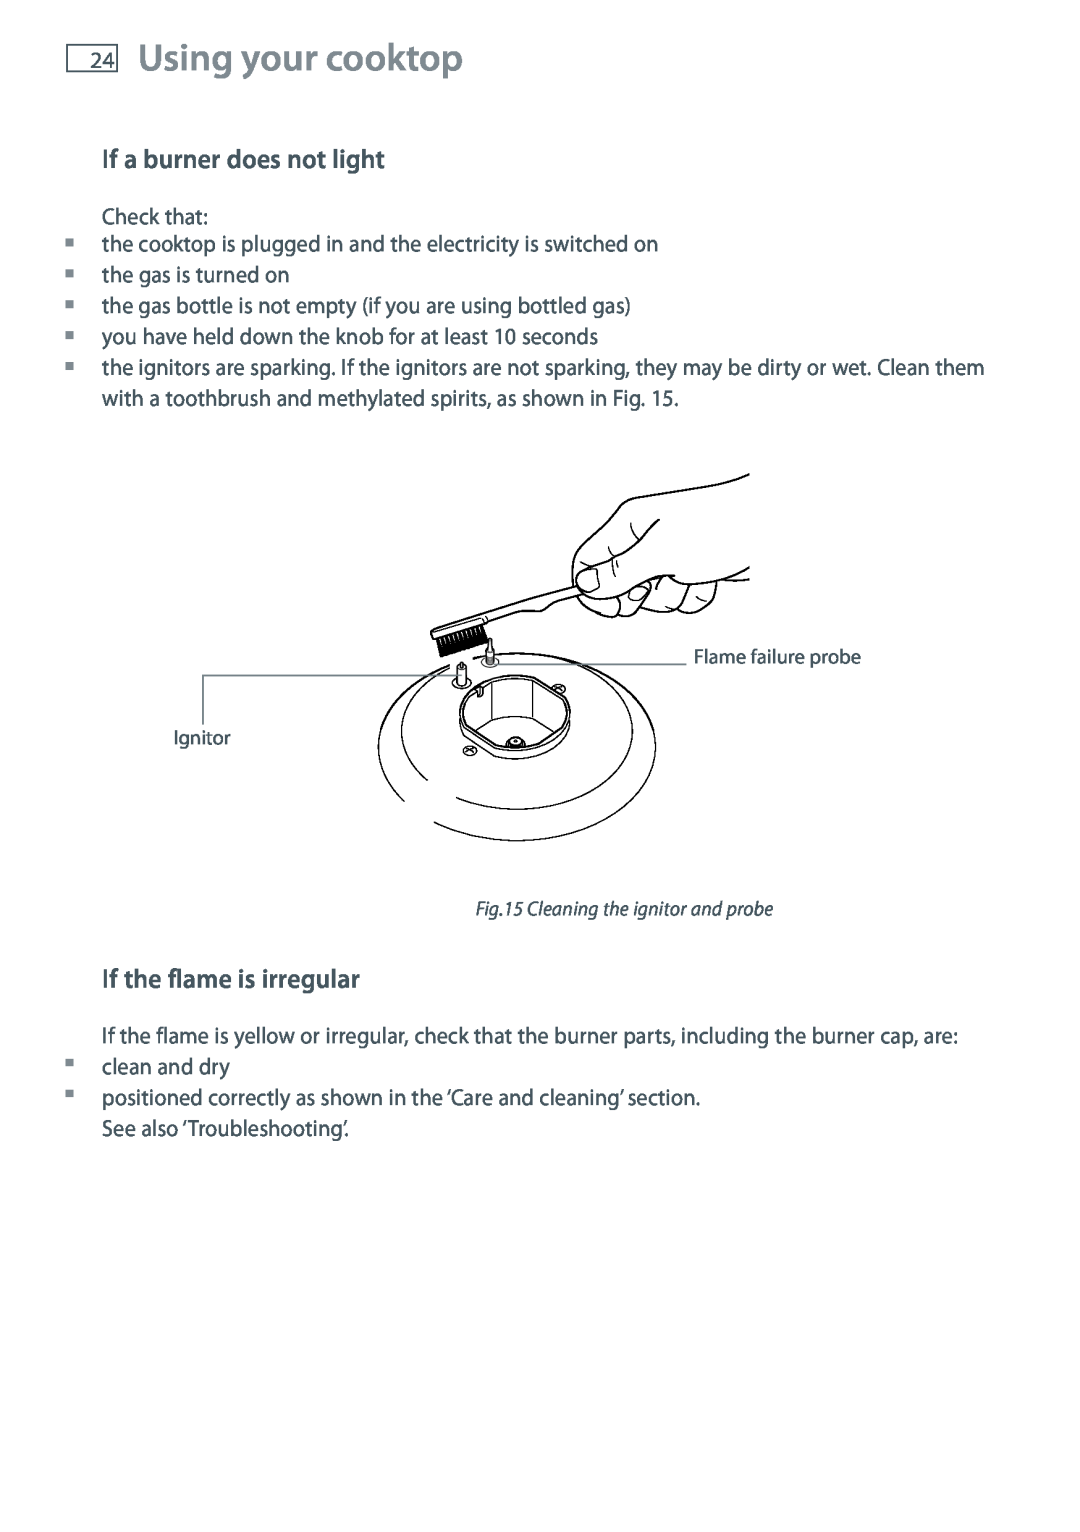 Fisher & Paykel CG755 installation instructions If a burner does not light, If the flame is irregular, Using your cooktop 